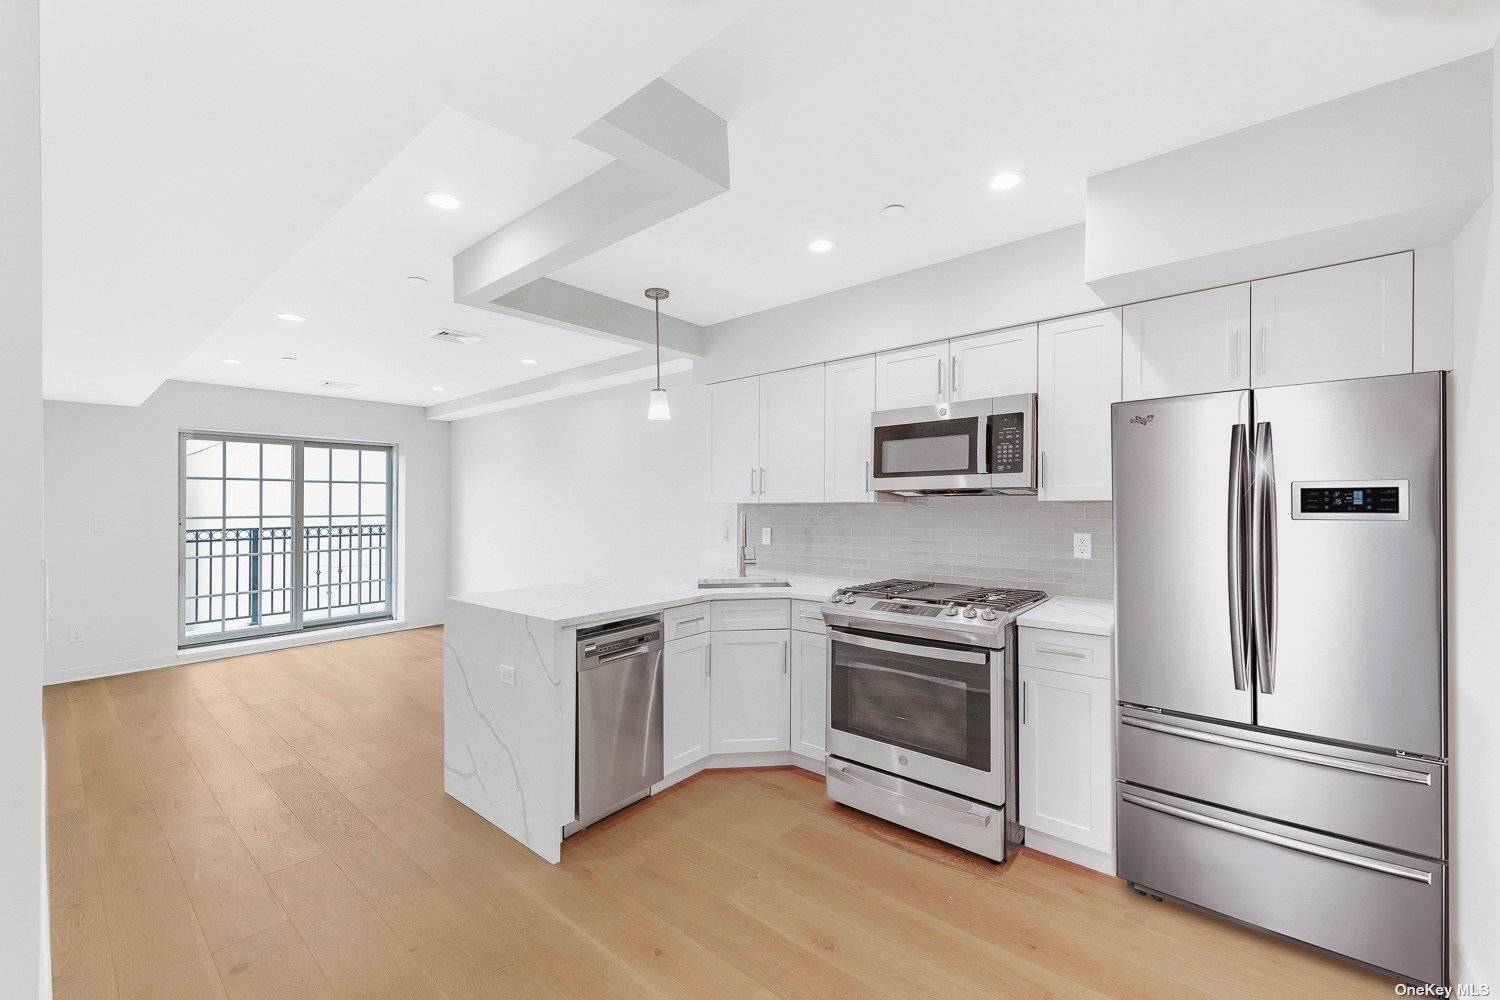 A Meticulously Designed amp ; Exceptionally Crafted 16 Unit Luxury Condominium Nestled on a Quiet Residential Block in the Heart of Astoria Queens.